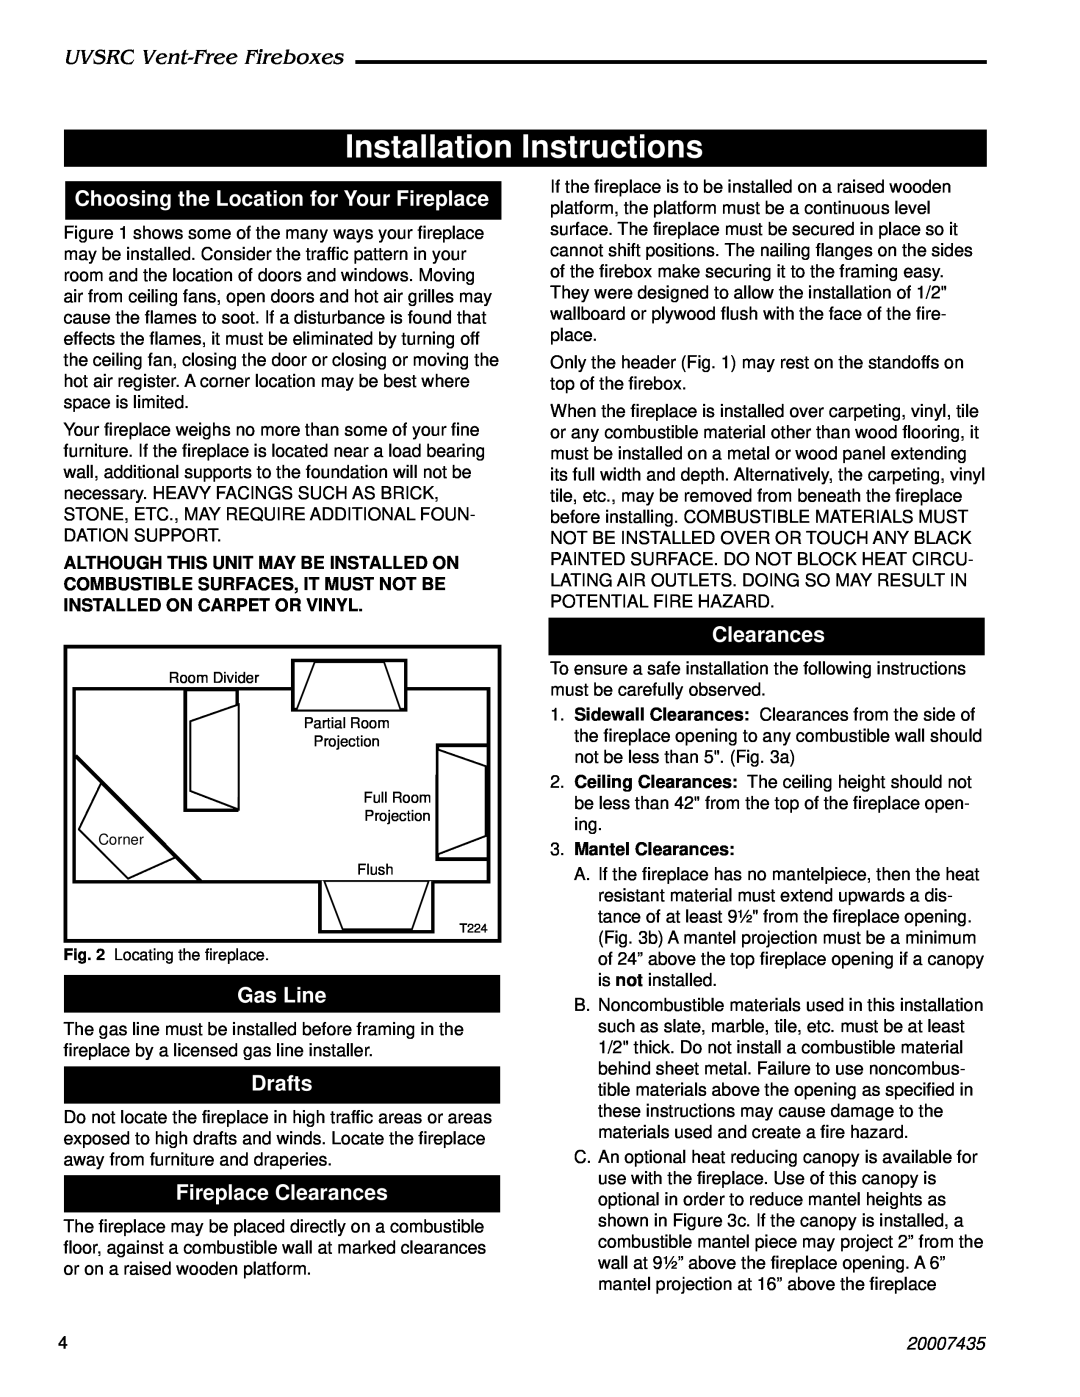 Majestic Appliances UVSRC36A Installation Instructions, Choosing the Location for Your Fireplace, Gas Line, Drafts 